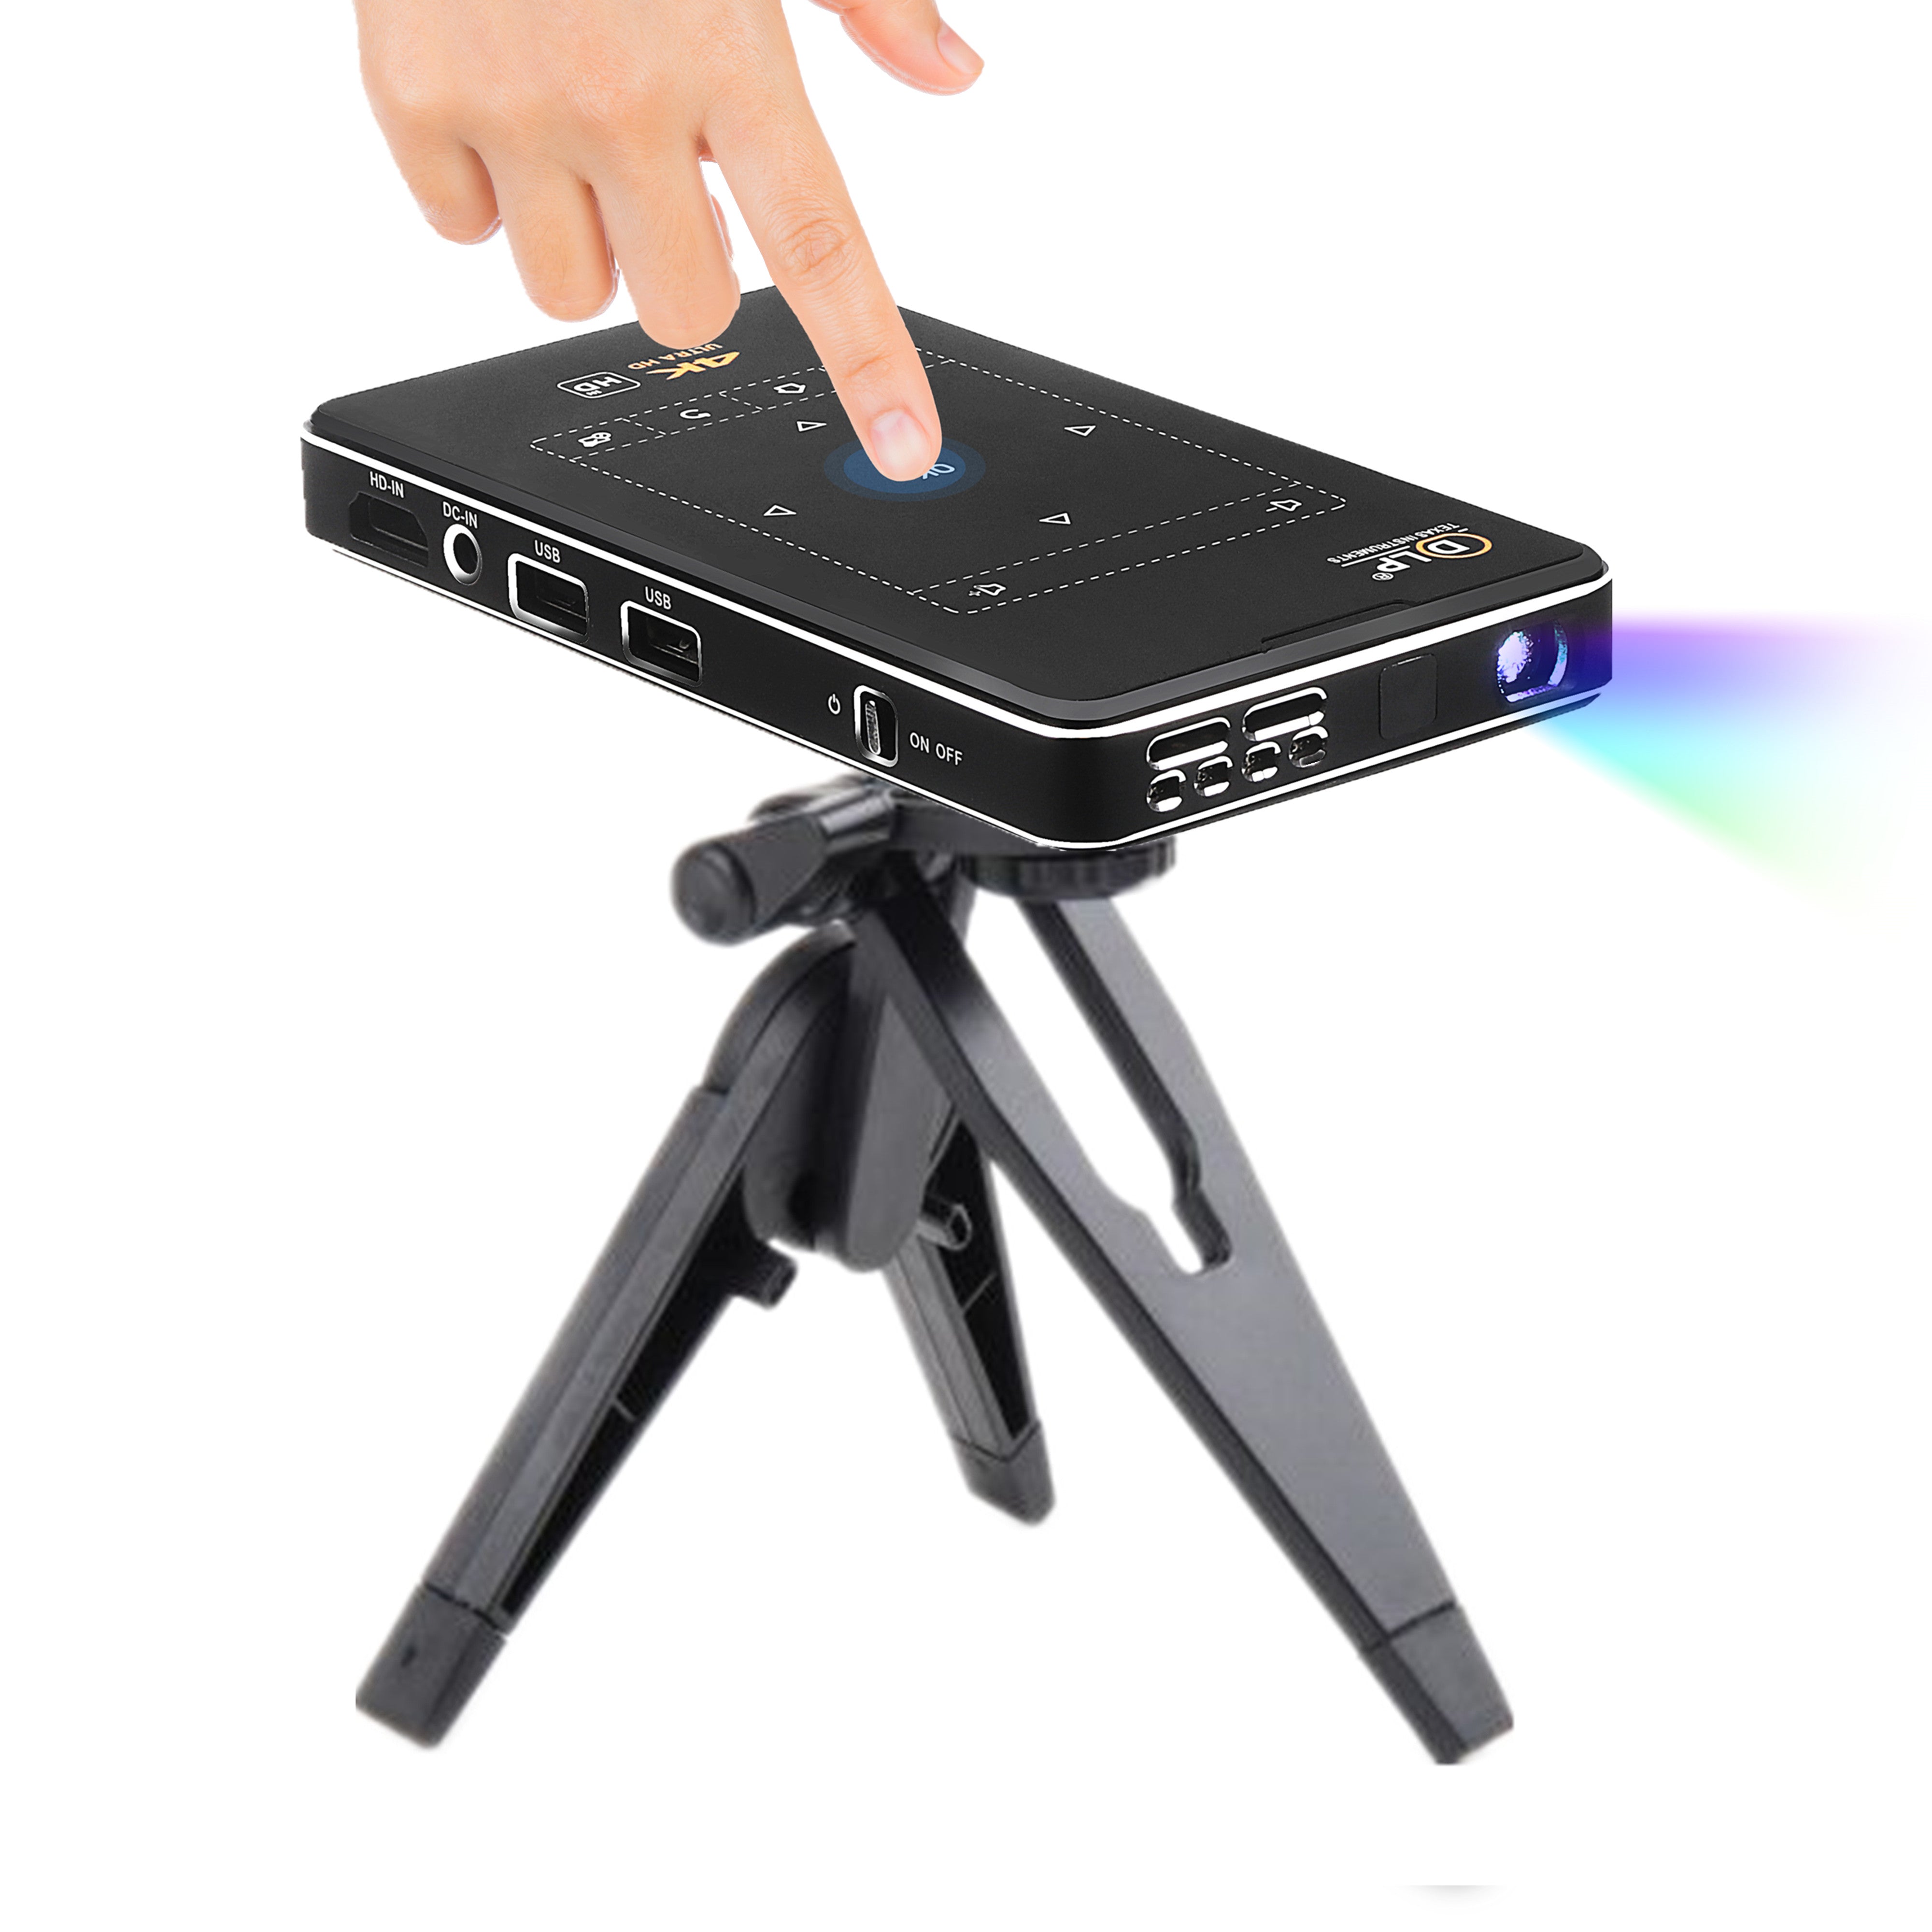 The Most Powerful 1080p Pocket Projector